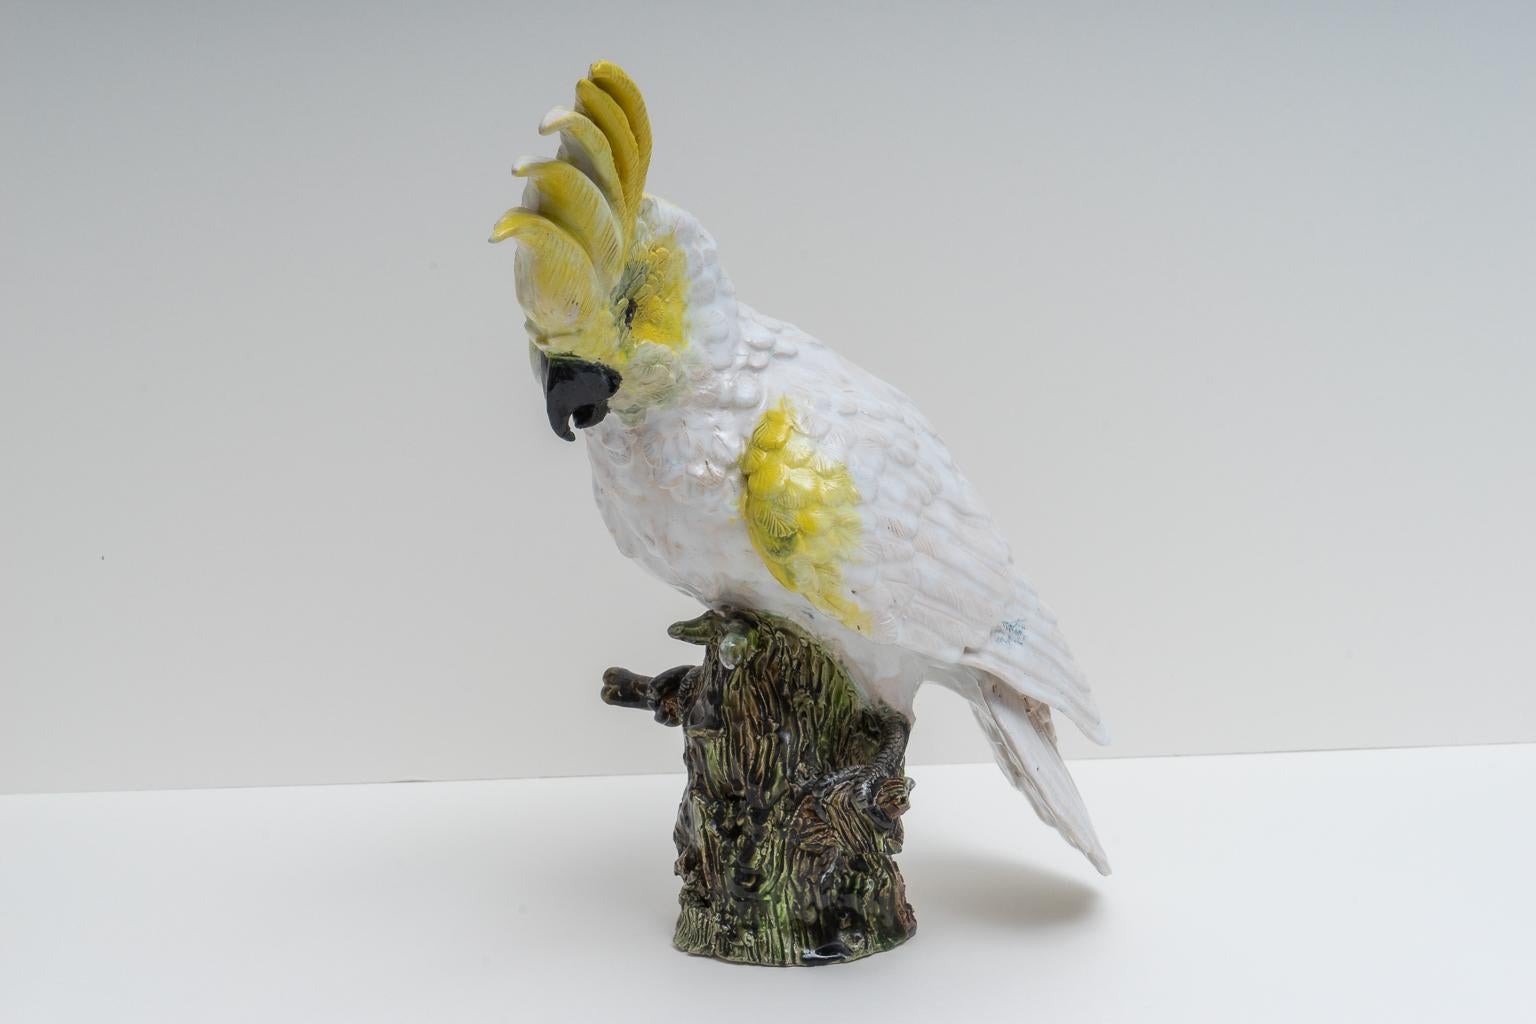 This stylish and chic Cockatoo figure was created in the 1930s-1940s by the French firm of Silvestrie and is hand painted in a soft colors of white, egg yolk yellow, mottled mossy green and black. The piece is perfect for an exotic interior or to